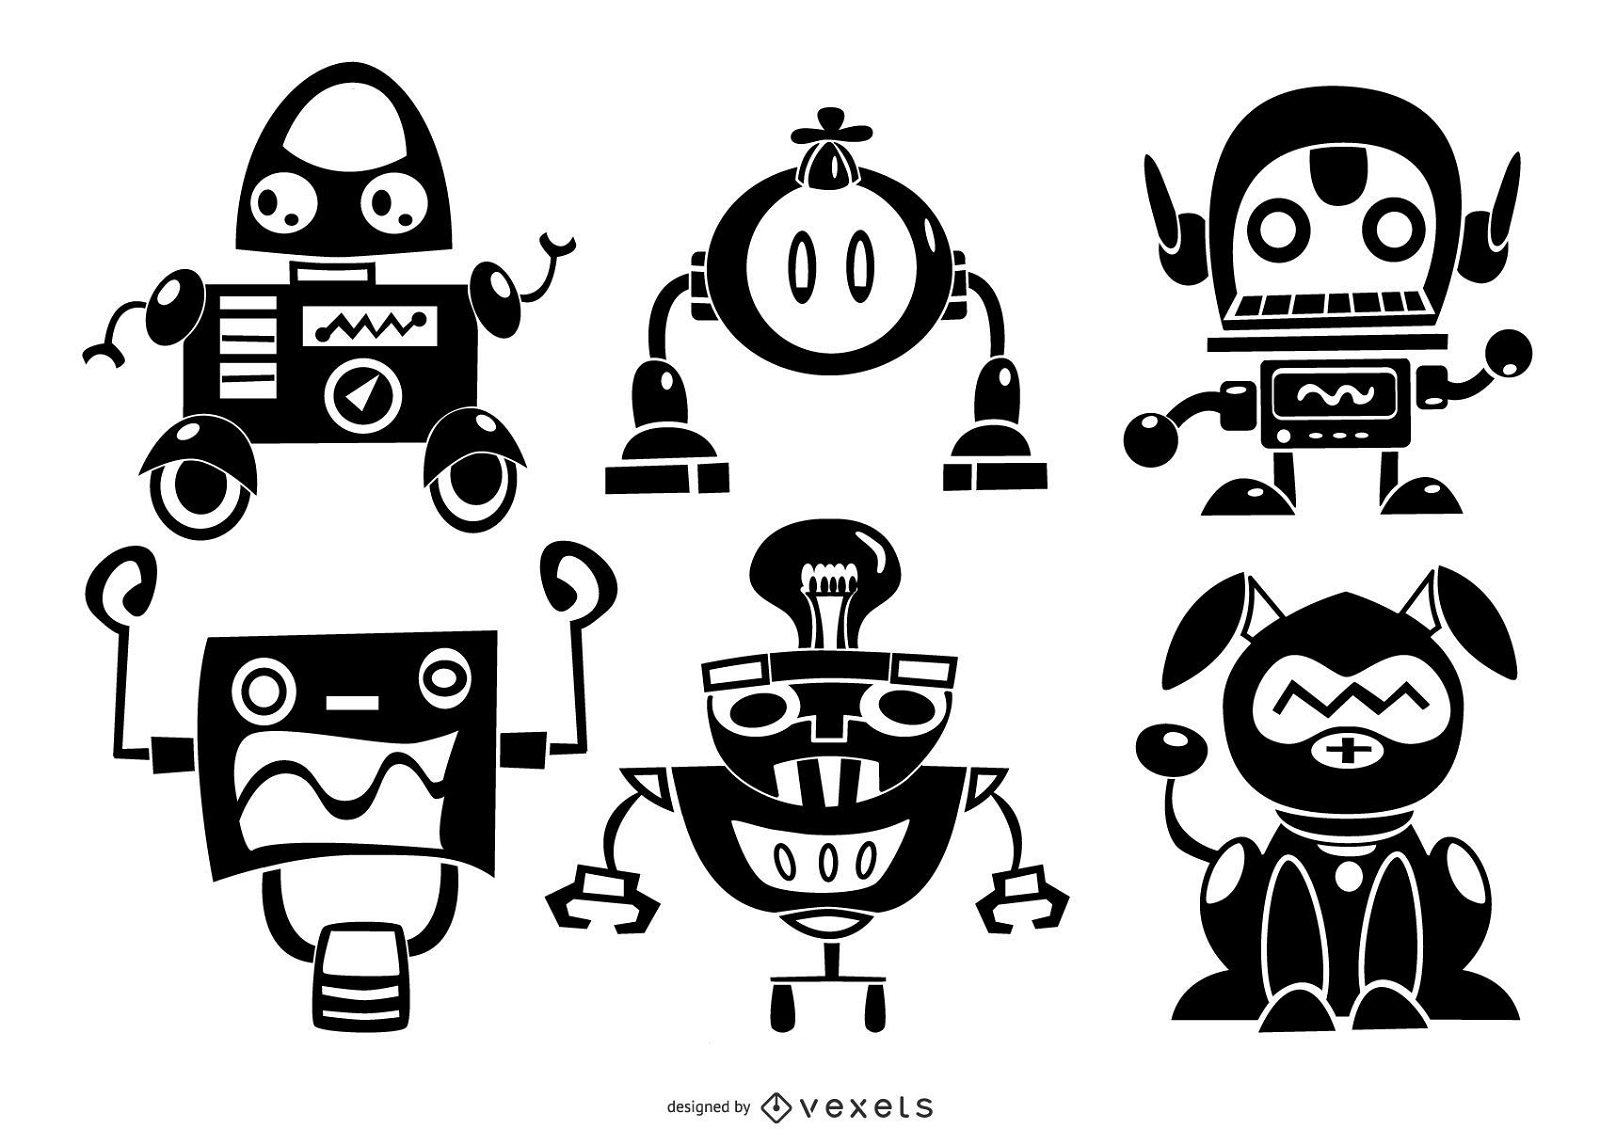 Robots silhouette character set